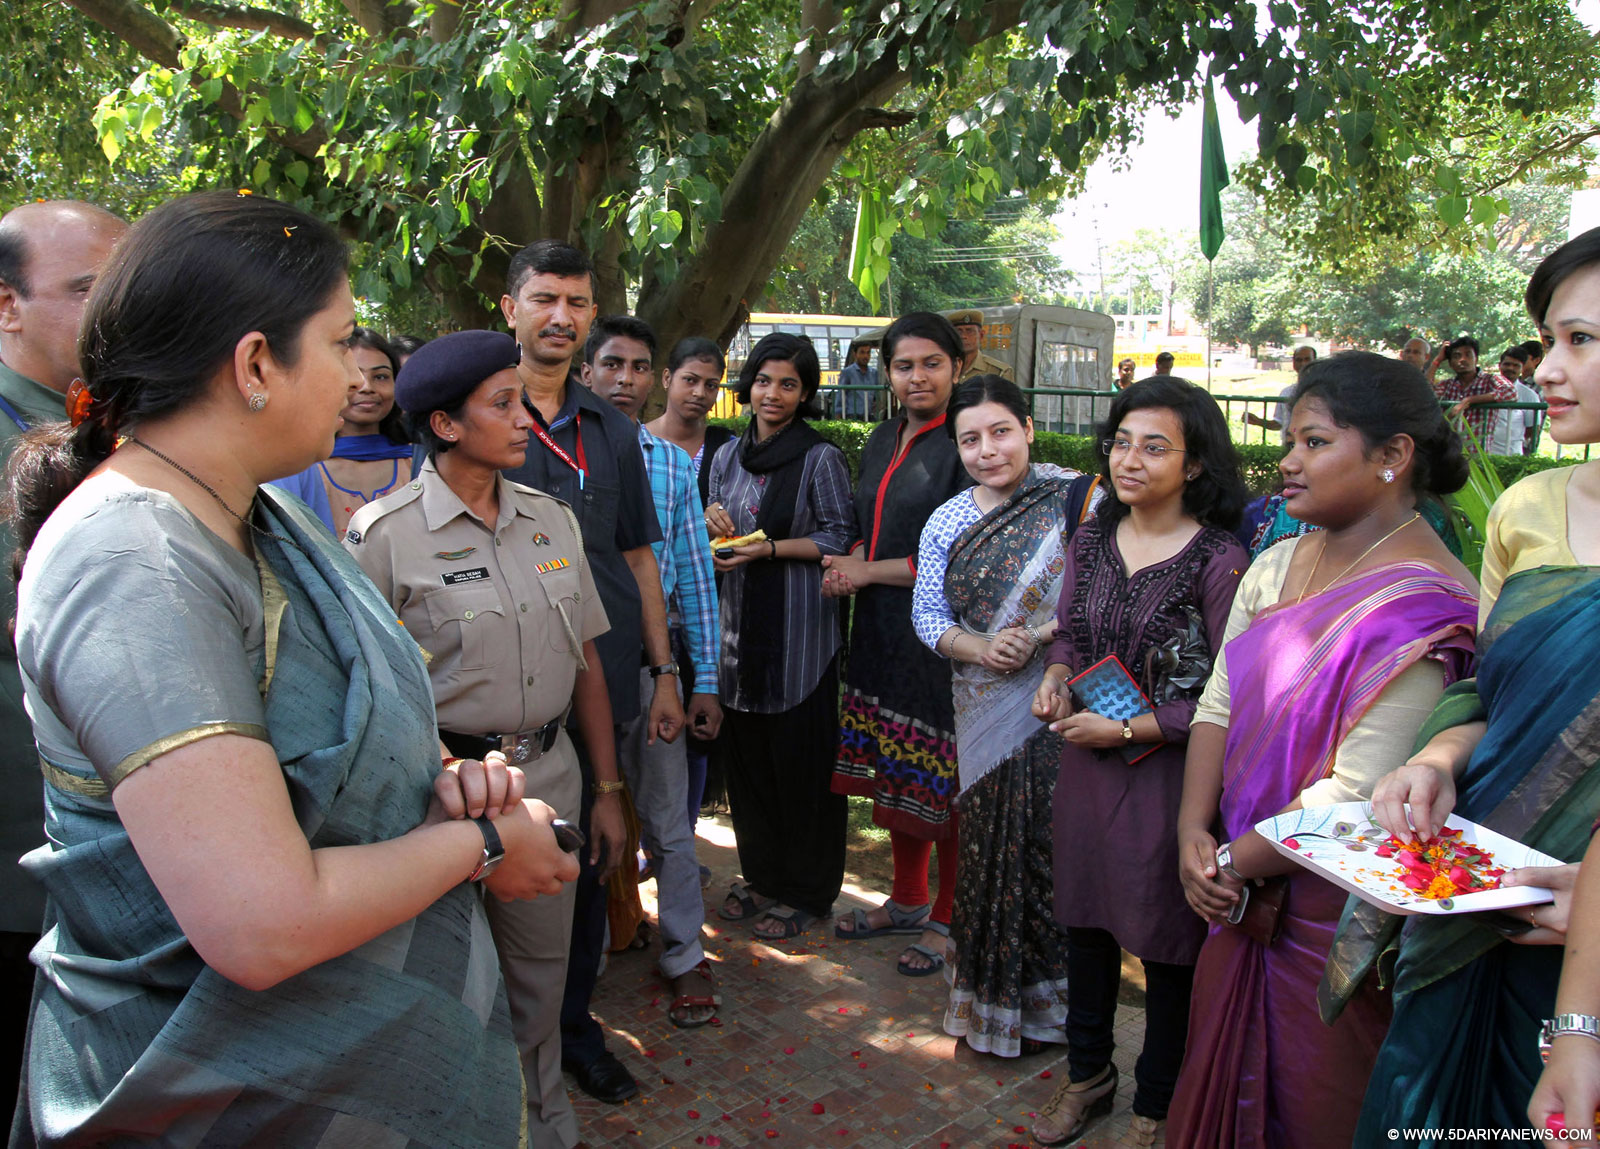 The Union Minister for Human Resource Development, Smt. Smriti Irani interacting with students of NIT, Agartala, in Tripura on September 18, 2015.